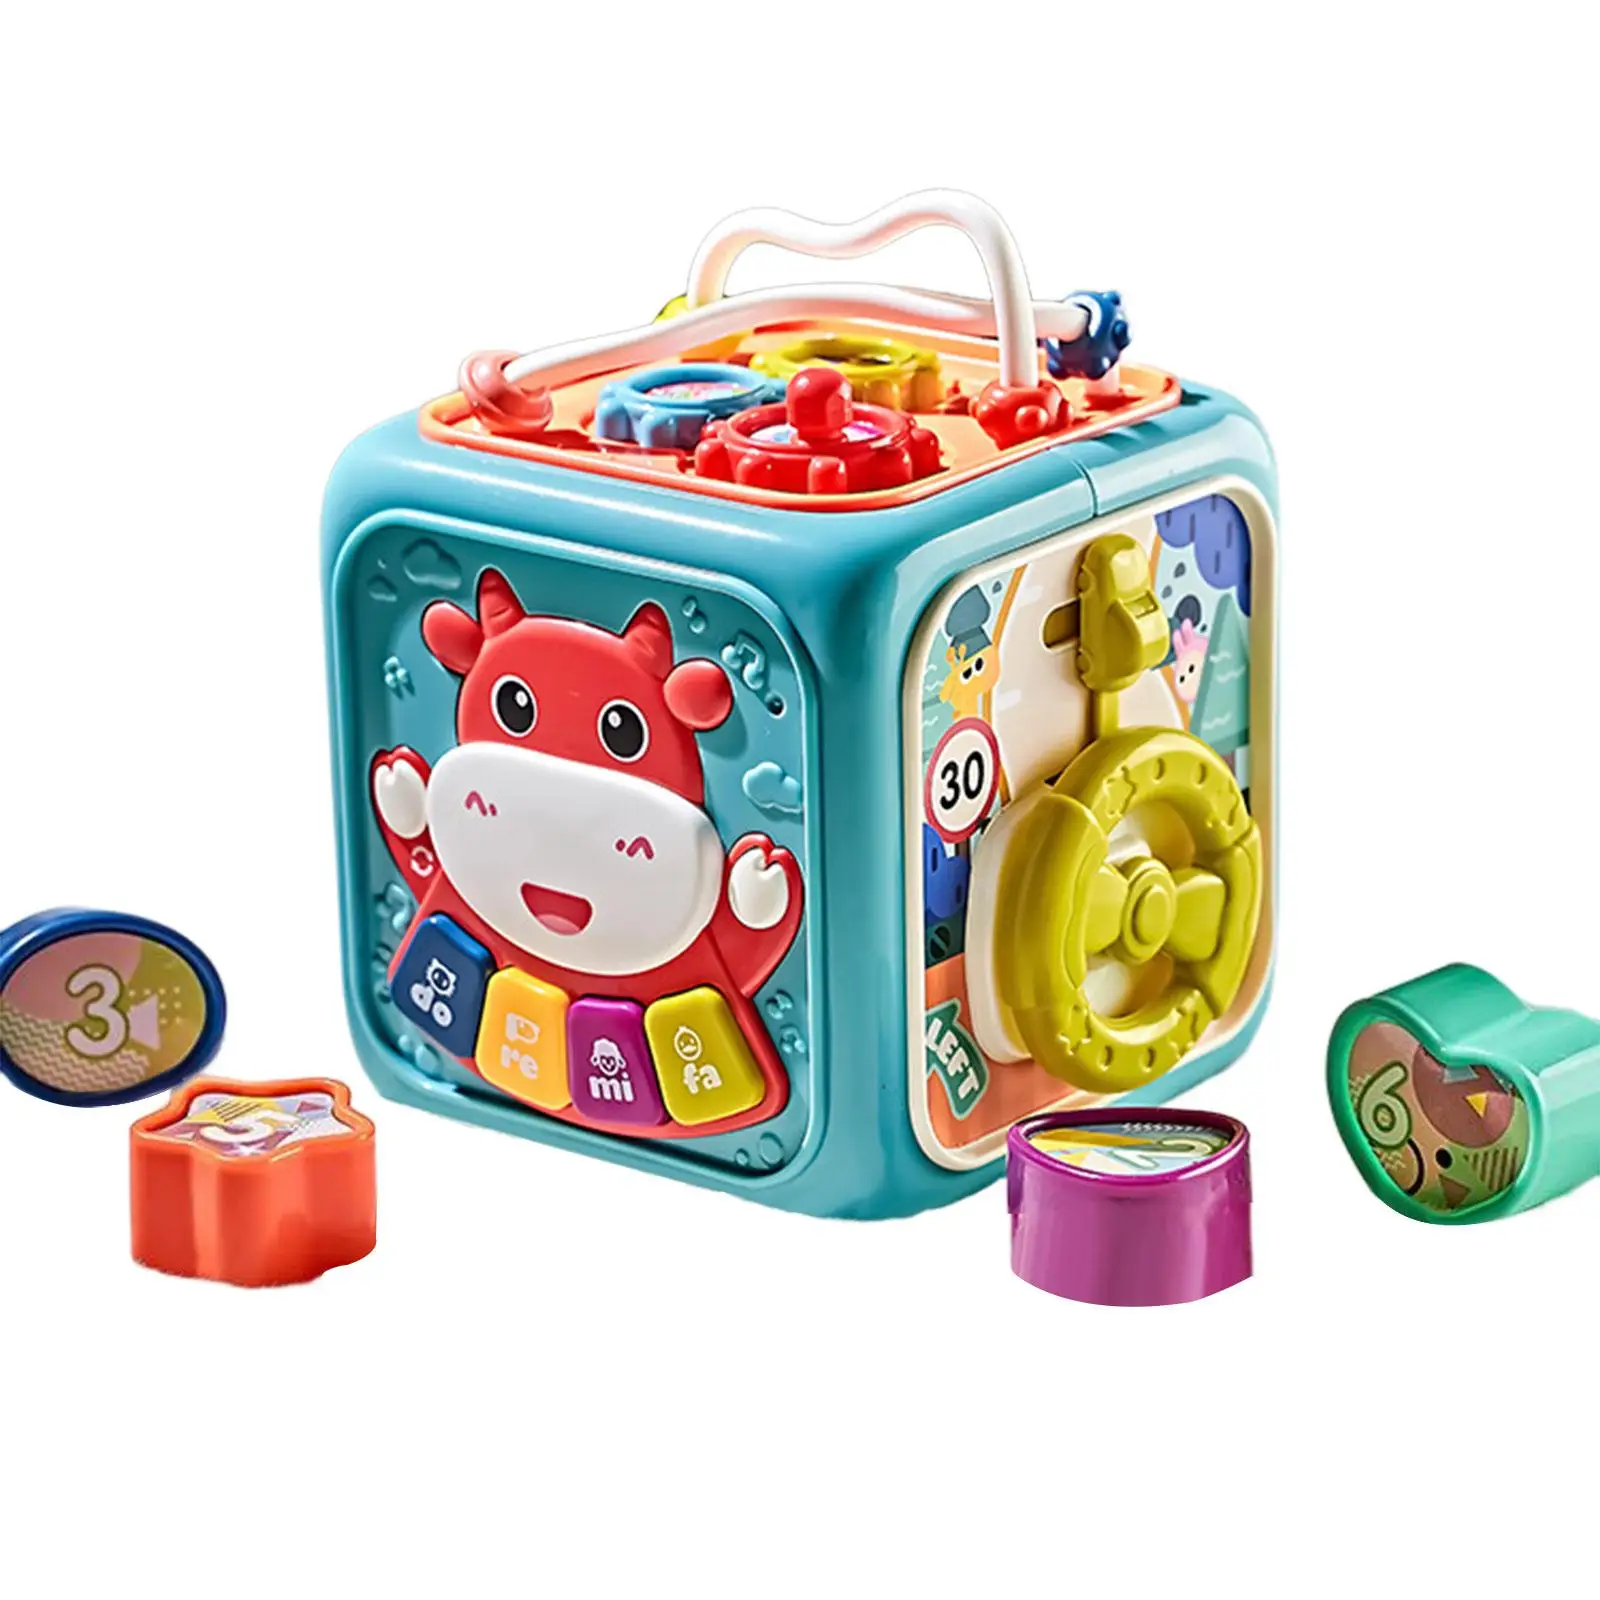 Activity Cube Baby Toy for Age 1 + Year Old Boys Girls Birthday Gift